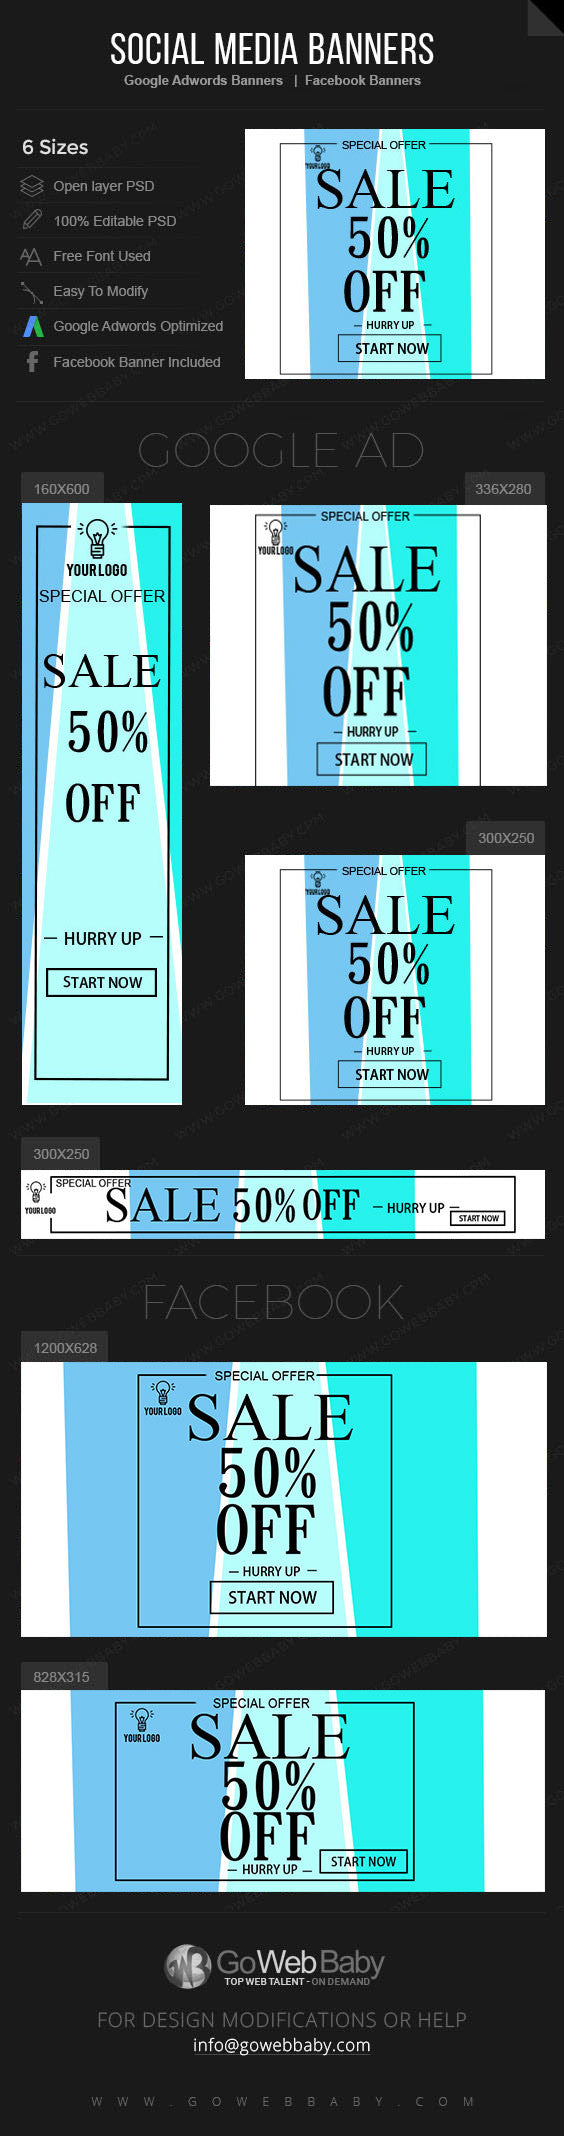 Google Adwords Display Banner with Facebook banners - Sale for Website Marketing - GoWebBaby.Com